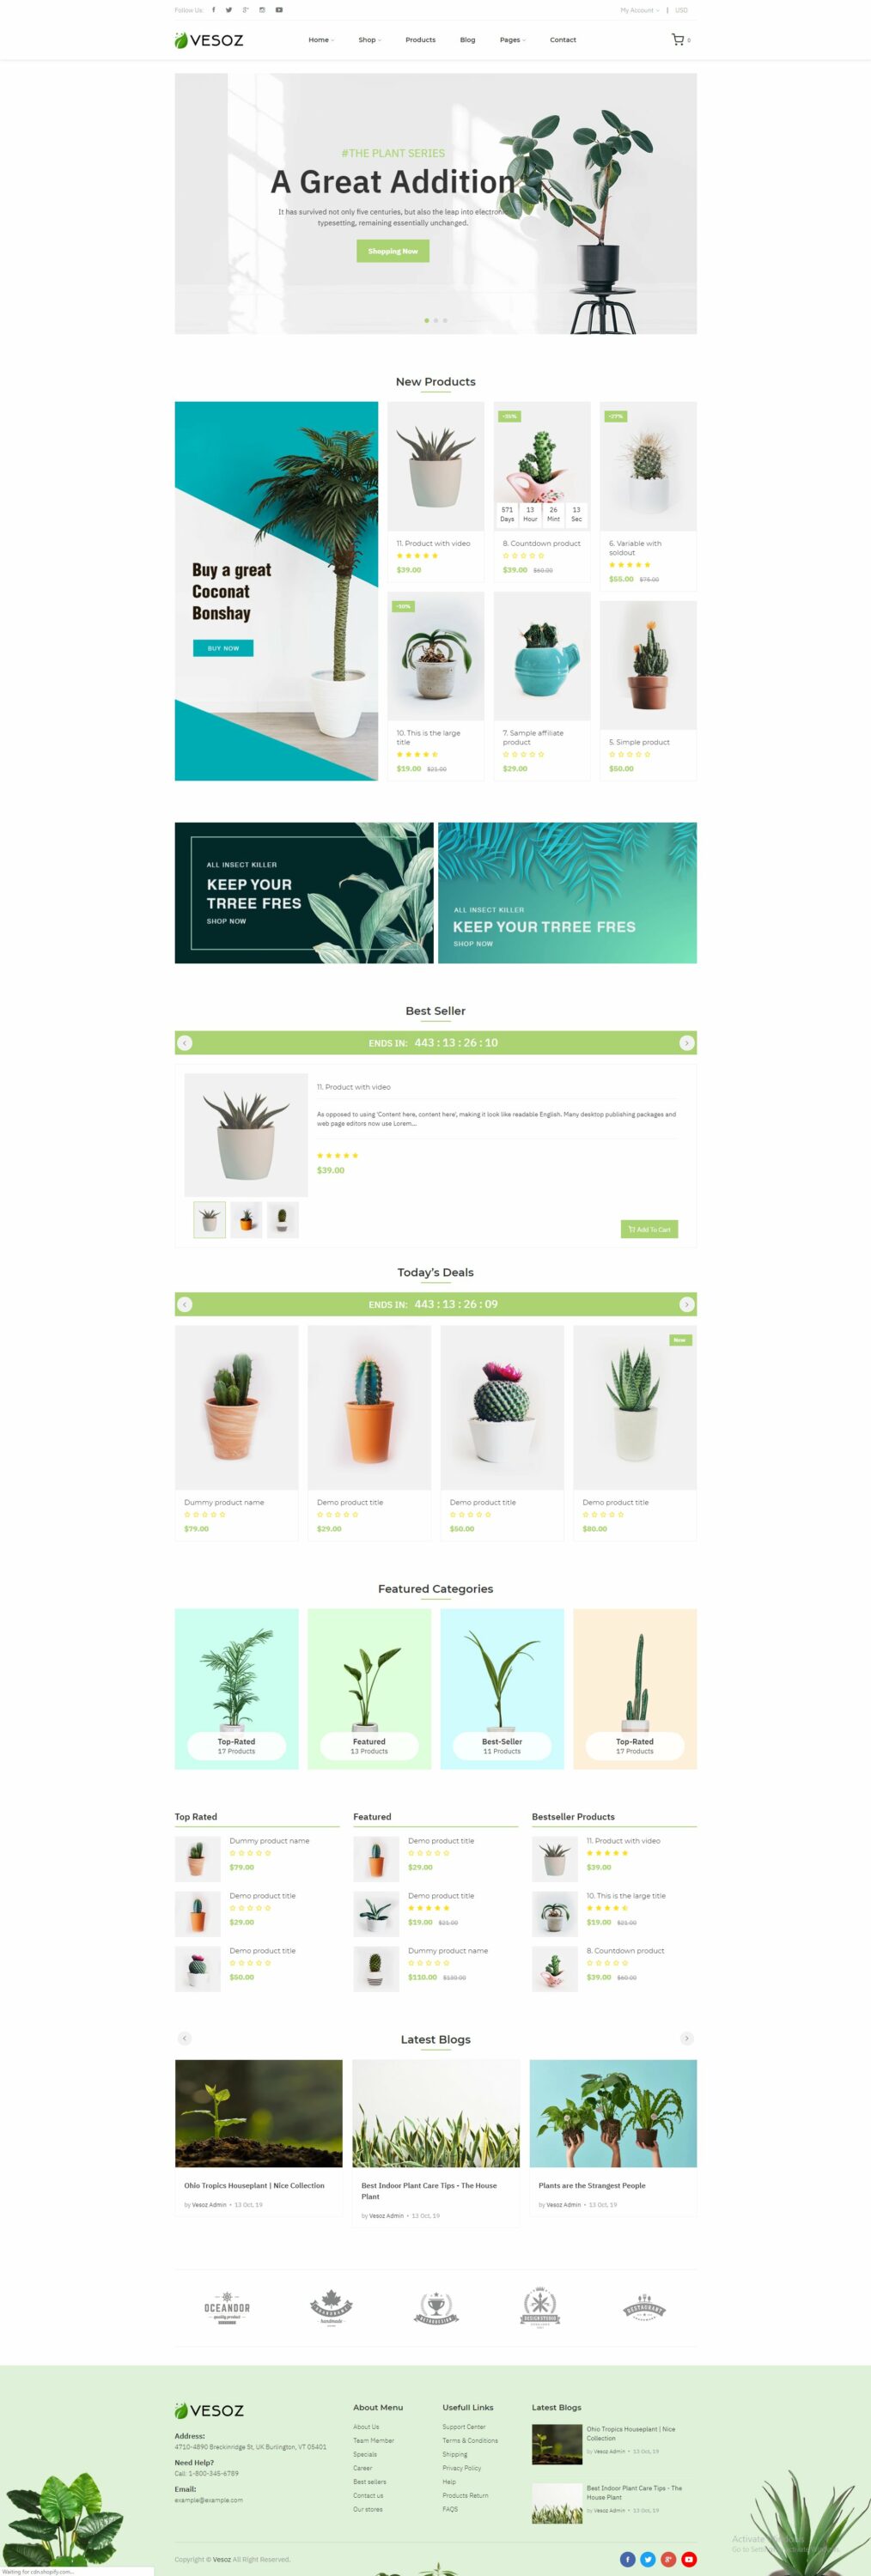 This template has a minimalistic design and fresh colors.